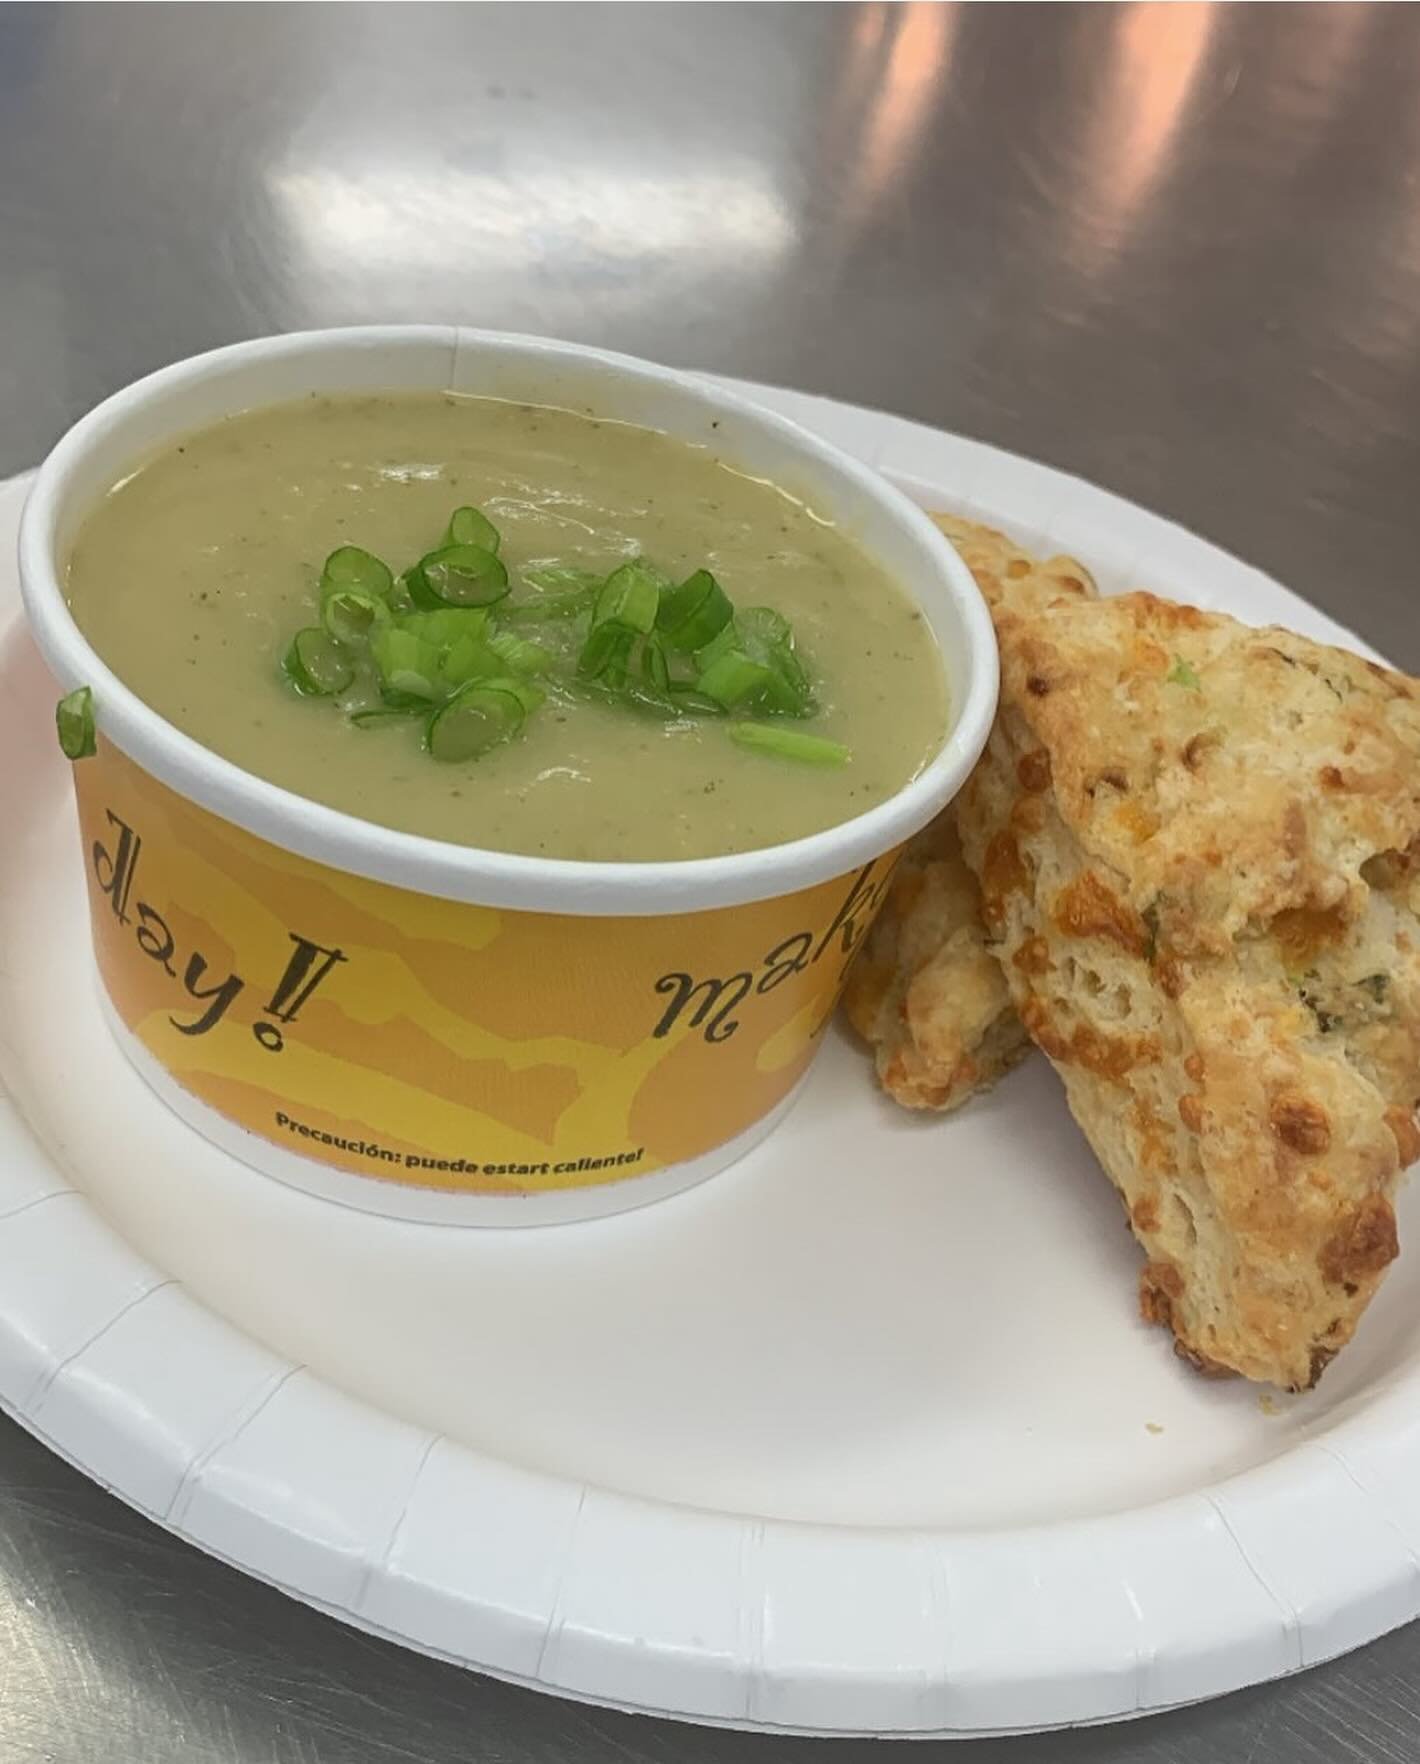 Scallion #scones and #soup made with #newjerseygrown #scallions are what students at @hawthorne.hs.cafeteria are enjoying. 🫶🏼❤️